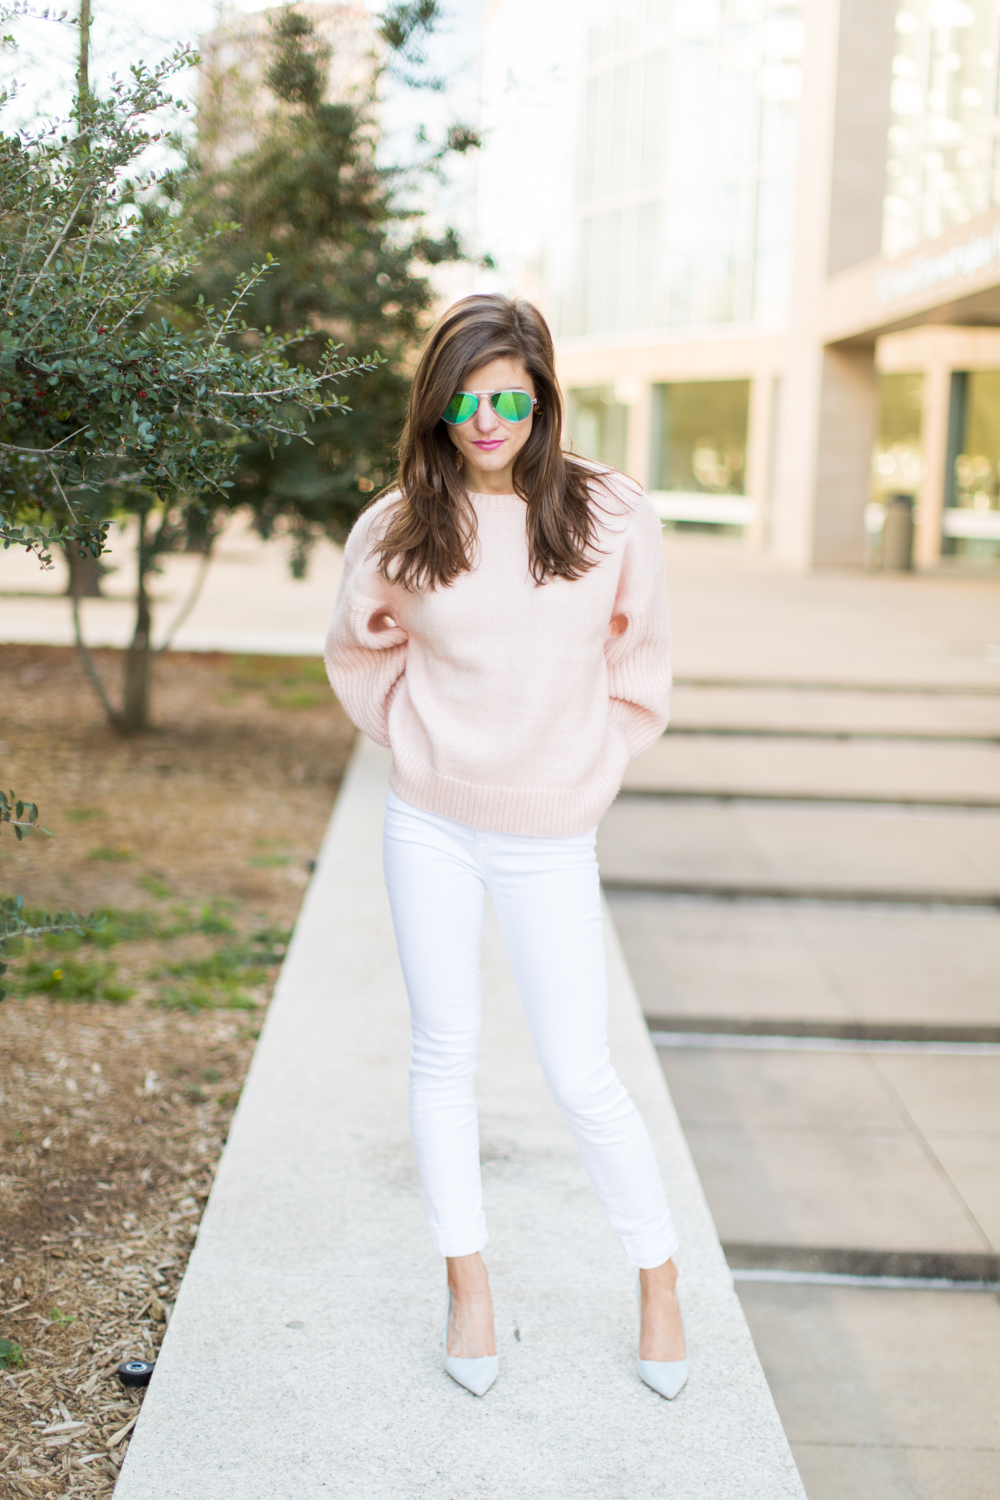 white jeans outfit, white jeans after labor day outfit, winter white jeans outfit, pastel pink and and blue outfit, oversized blush pink sweater with white jeans and stilettos, casual chic outfit